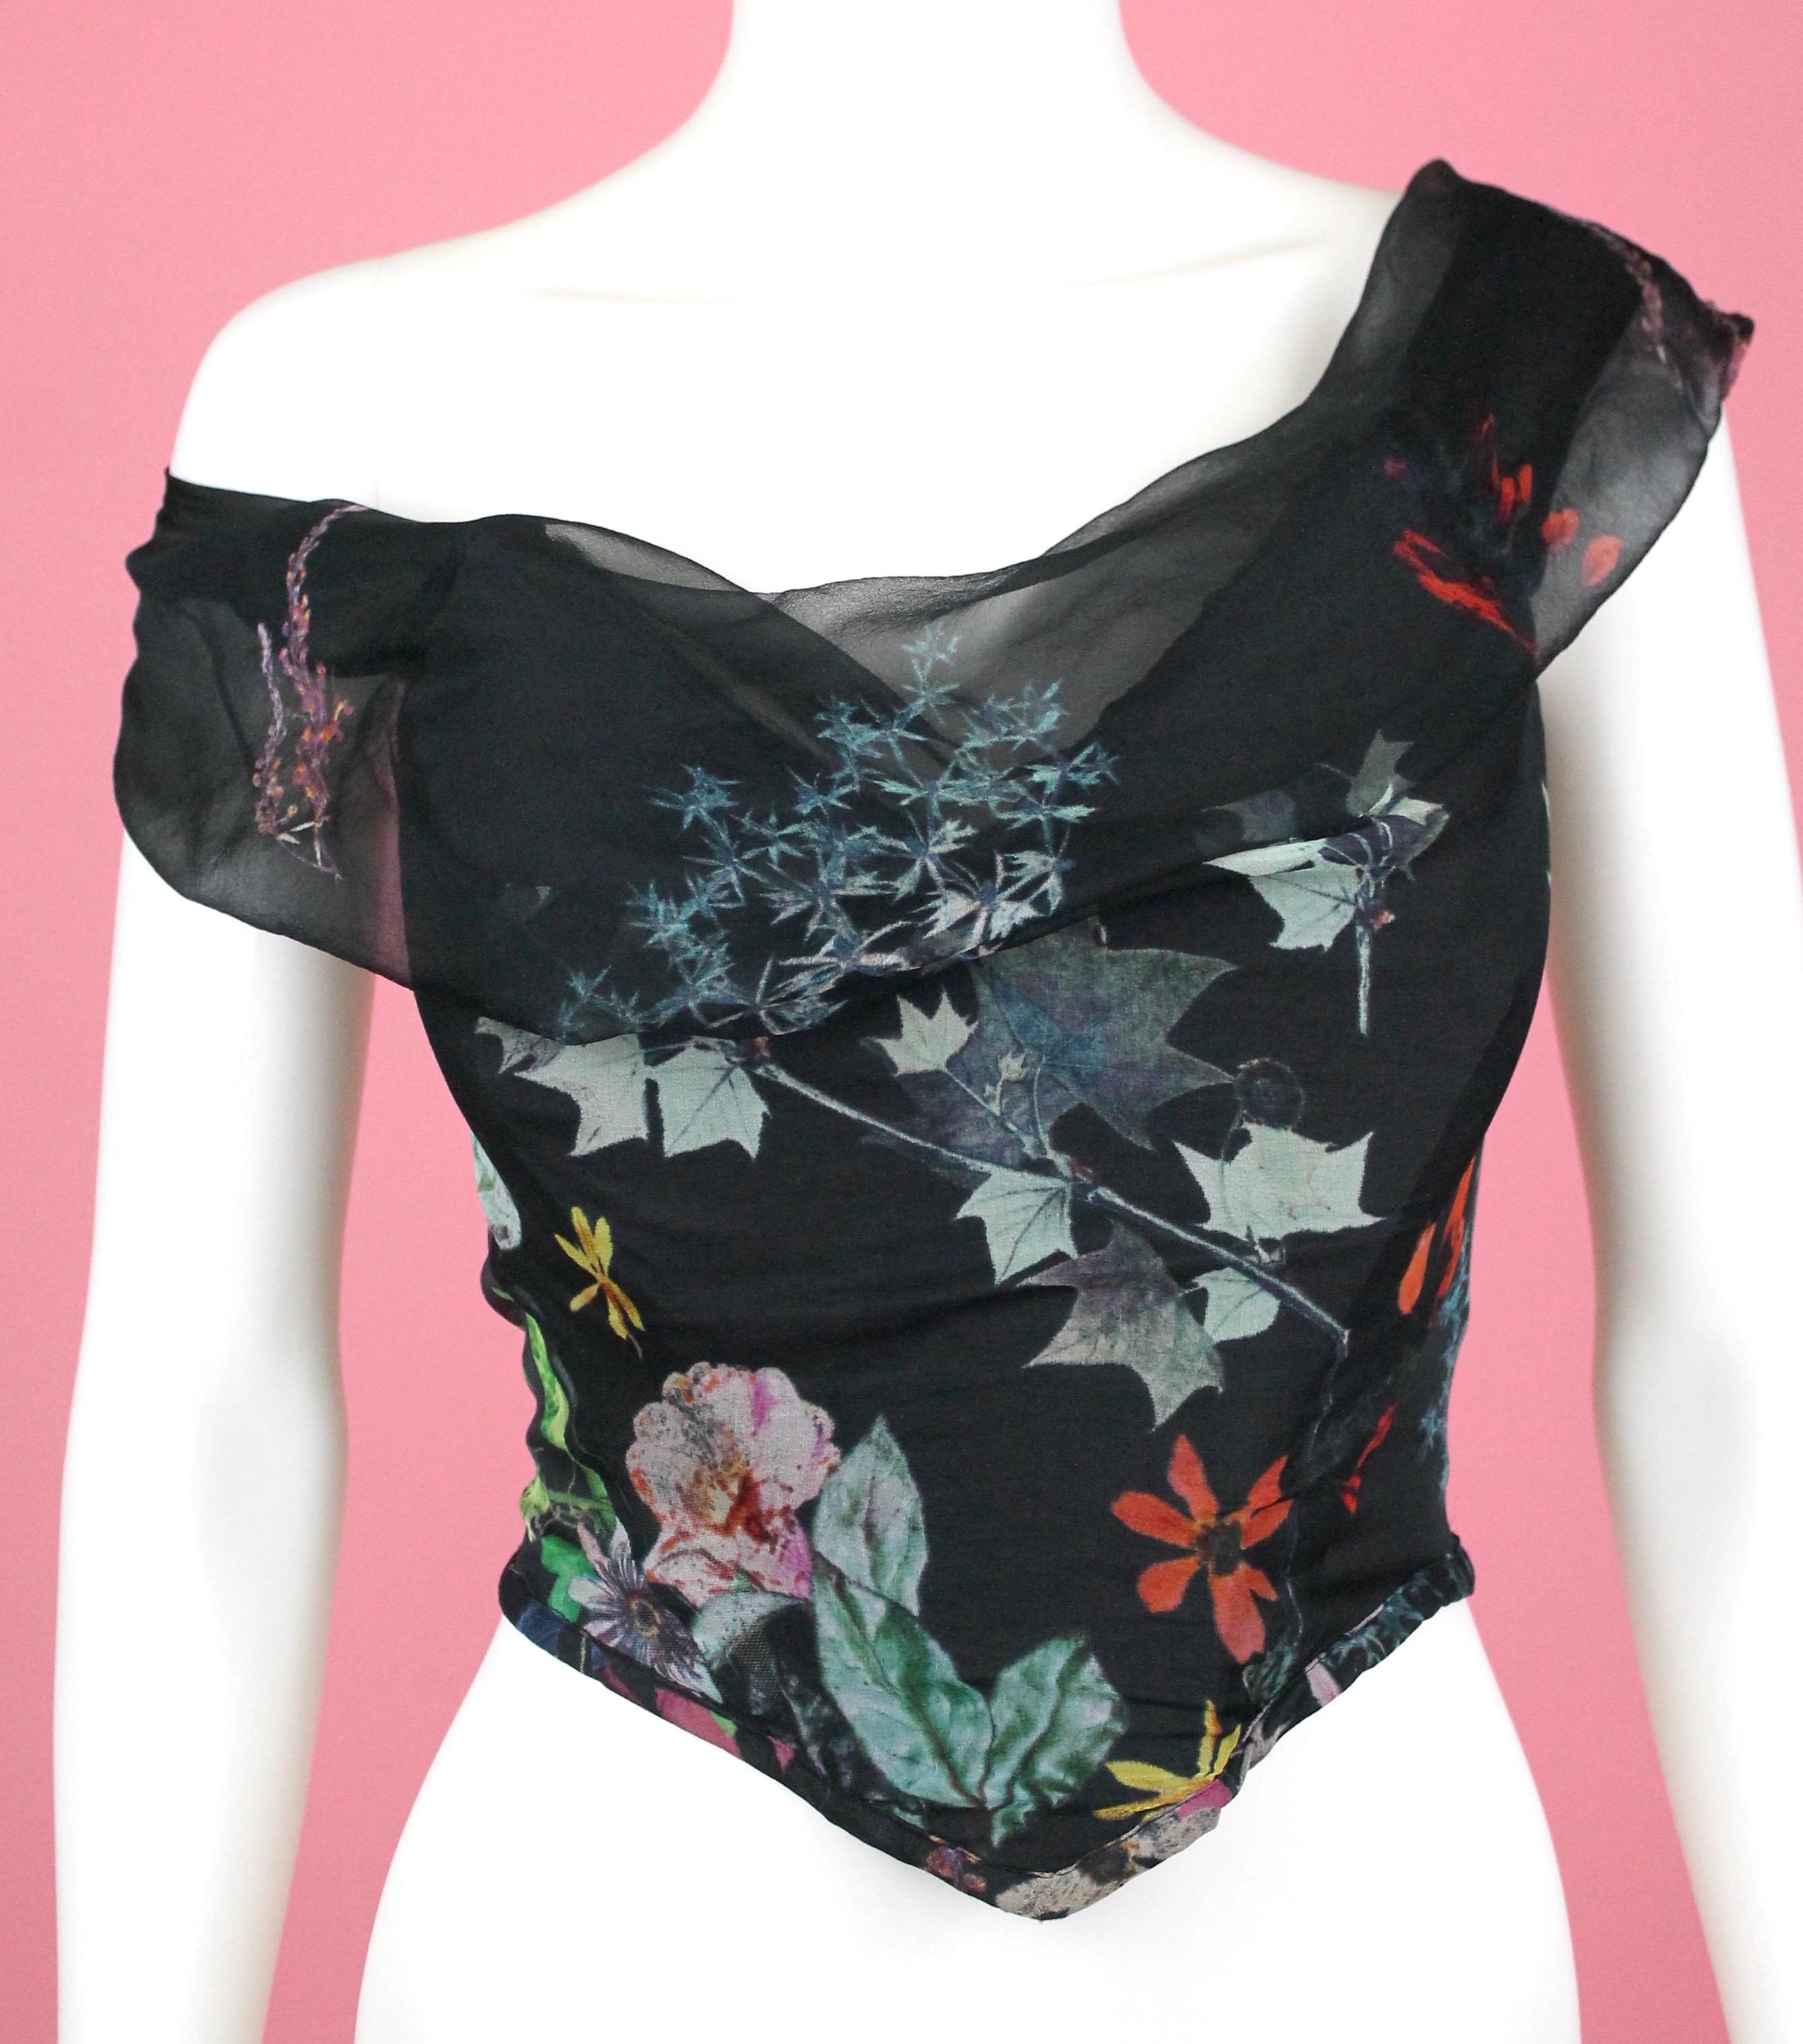 -Beautiful corset from Vivienne Westwood Red Label
-Made of 100% silk with 100% cotton lining
-Corset is decorated with autumnal leaves.
-The draping on the bust has a floating effect, the silk fabric used is sheer on this part. 
-Side panels to